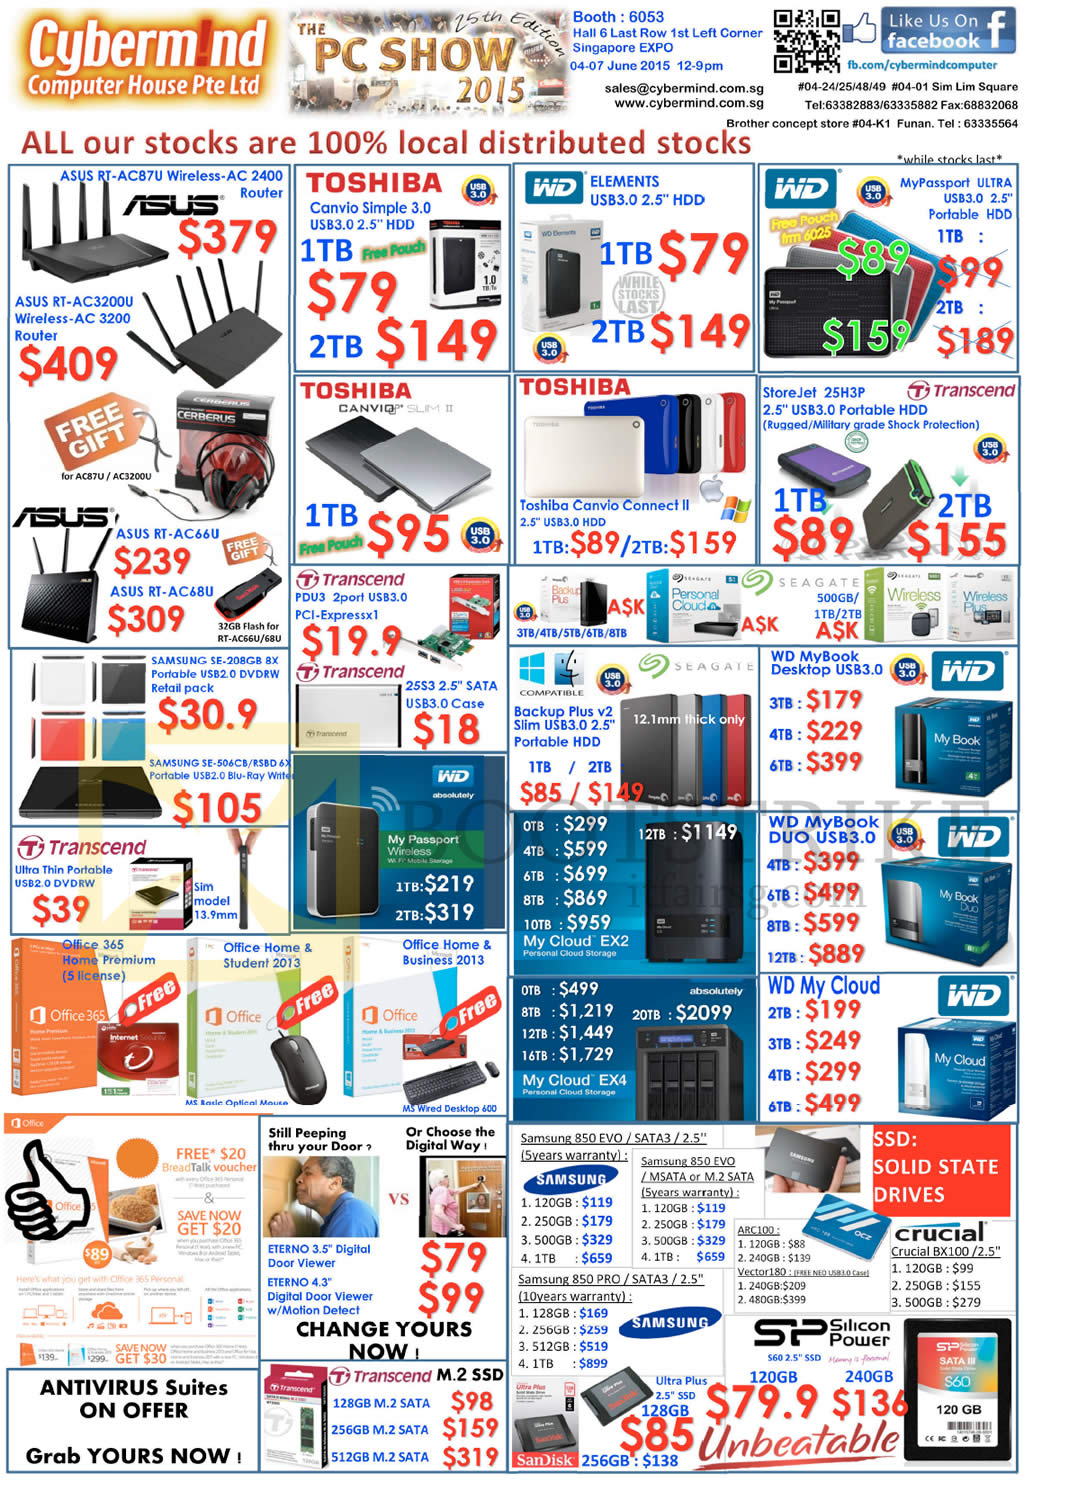 PC SHOW 2015 price list image brochure of Cybermind Accessories, Routers, ASUS, External Storage Drive, My Book, Office 365, SSD, Evo Pro, Cloud, Toshiba Canvio Connect II, Passport